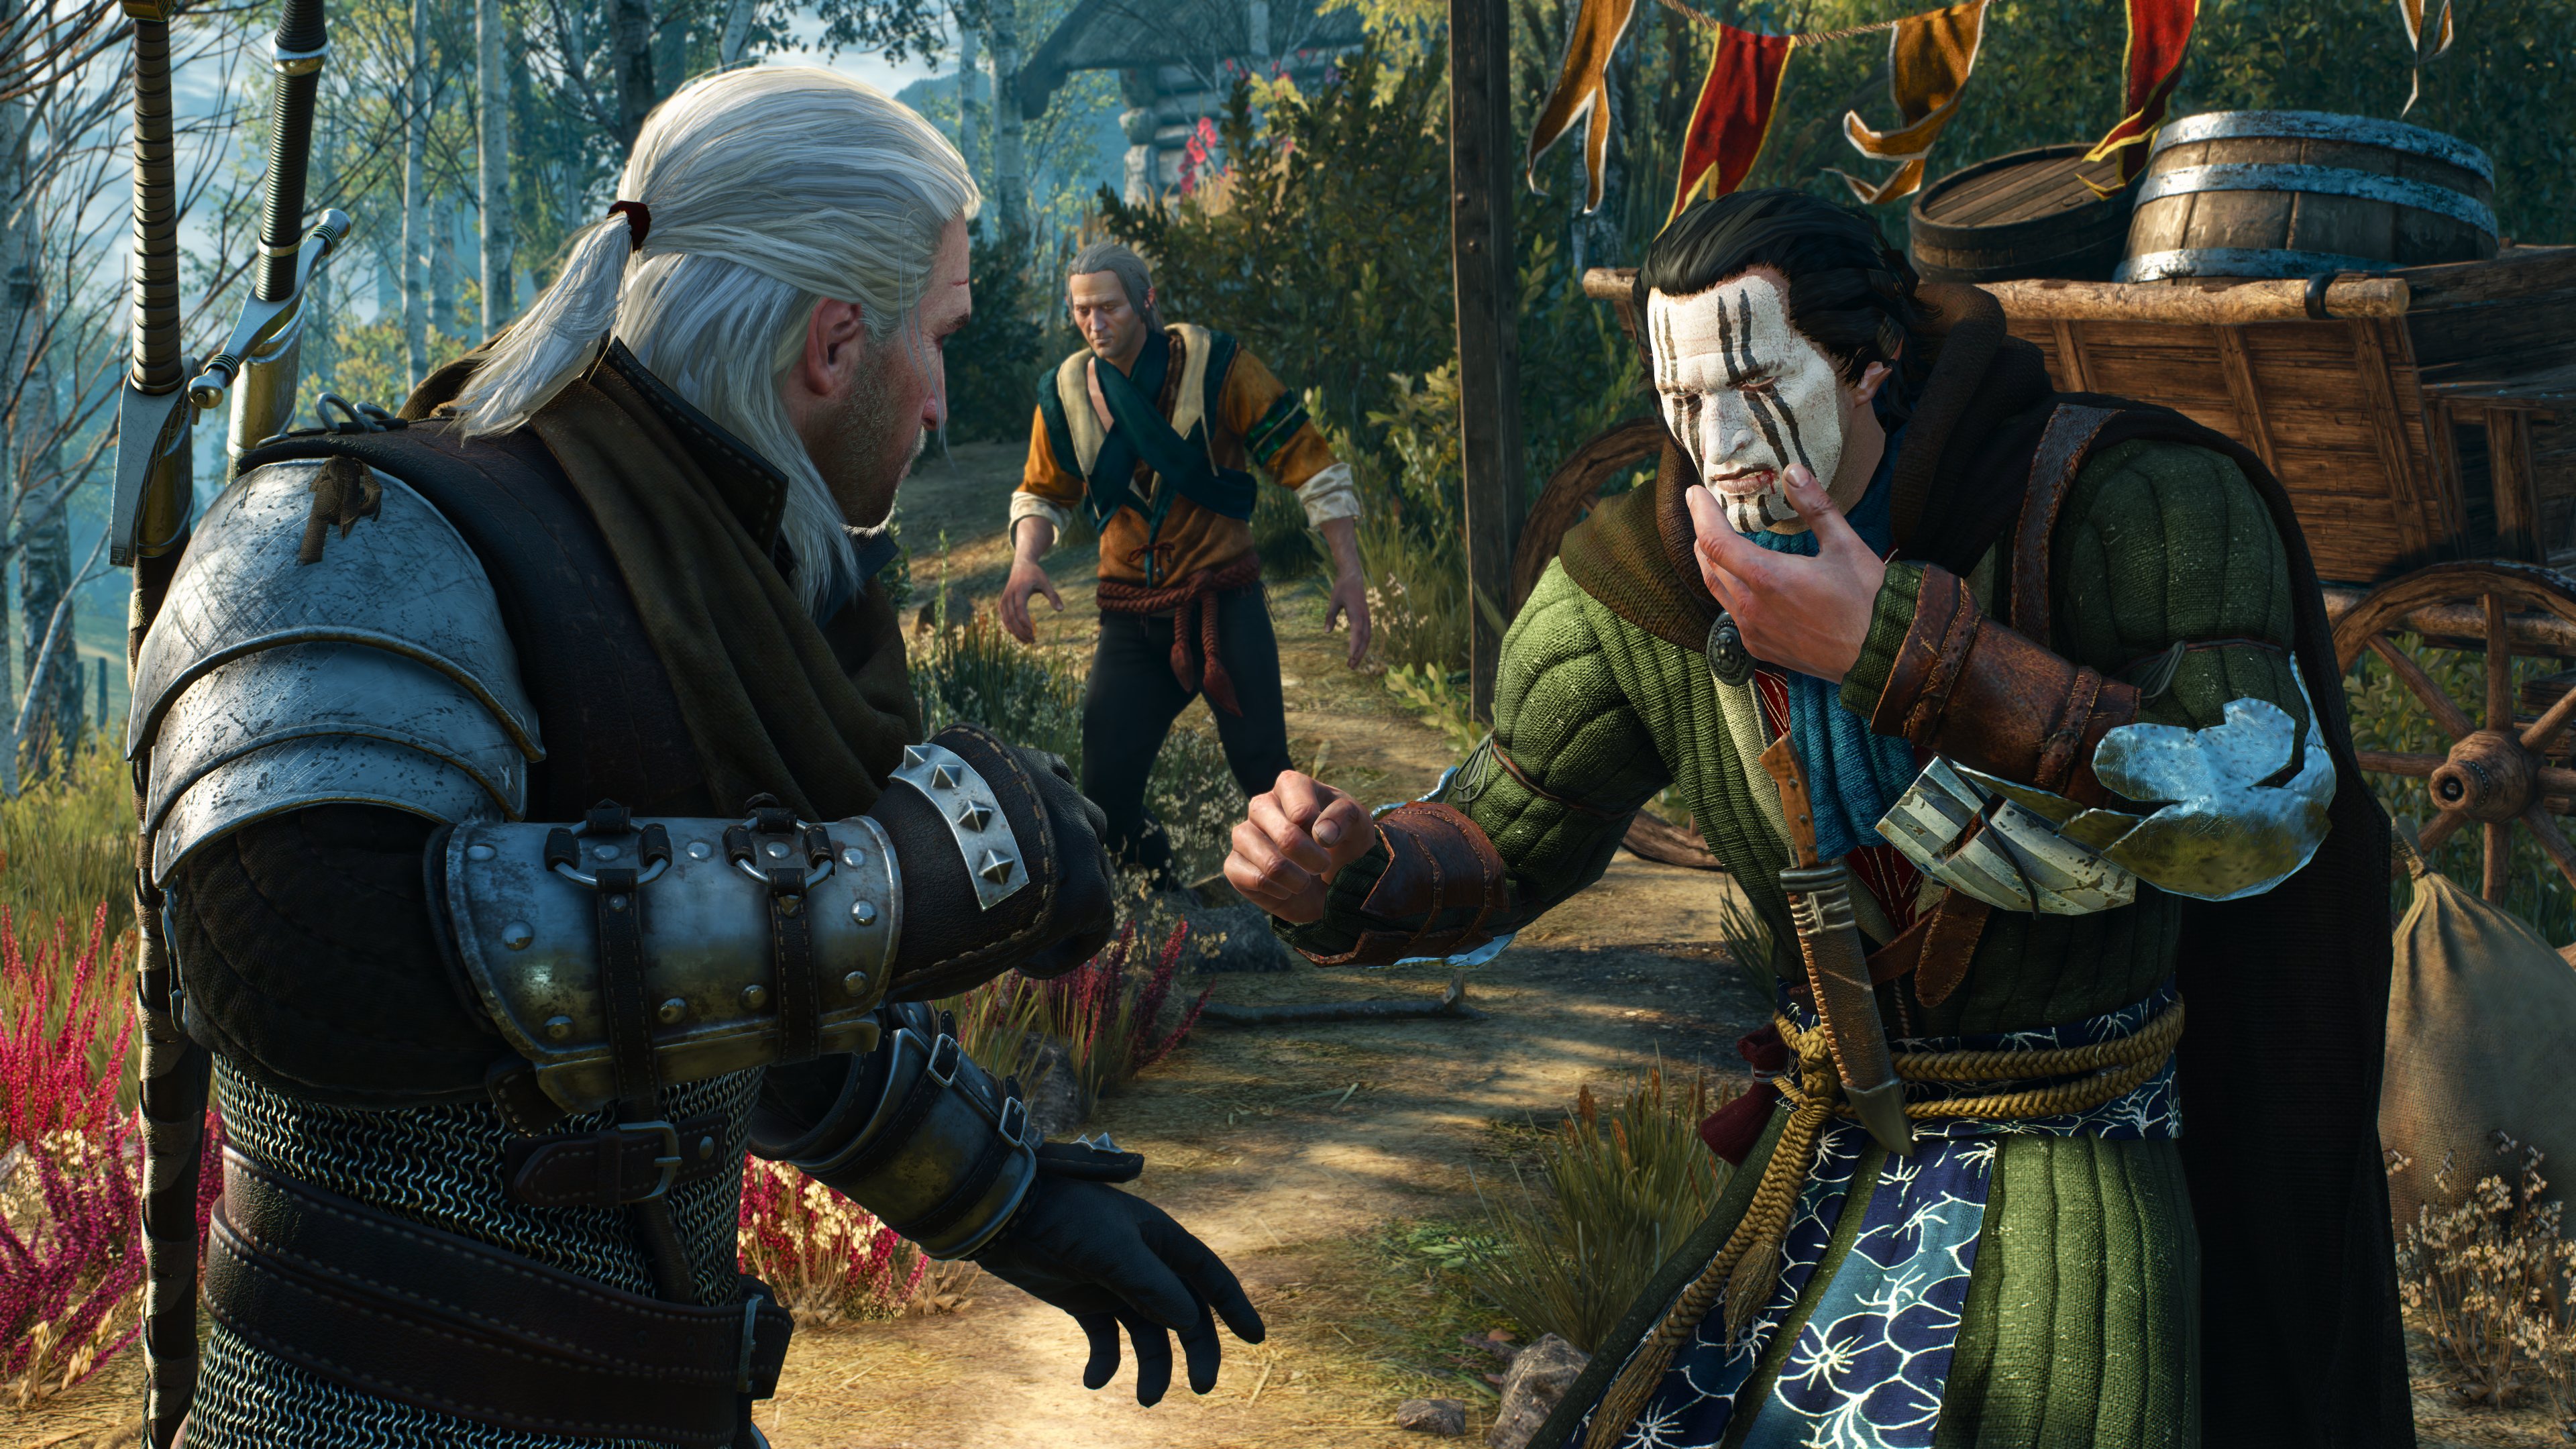 THE WITCHER 3 - WILD HUNT [Review/Podcast]: Go Ahead, Have My Day.